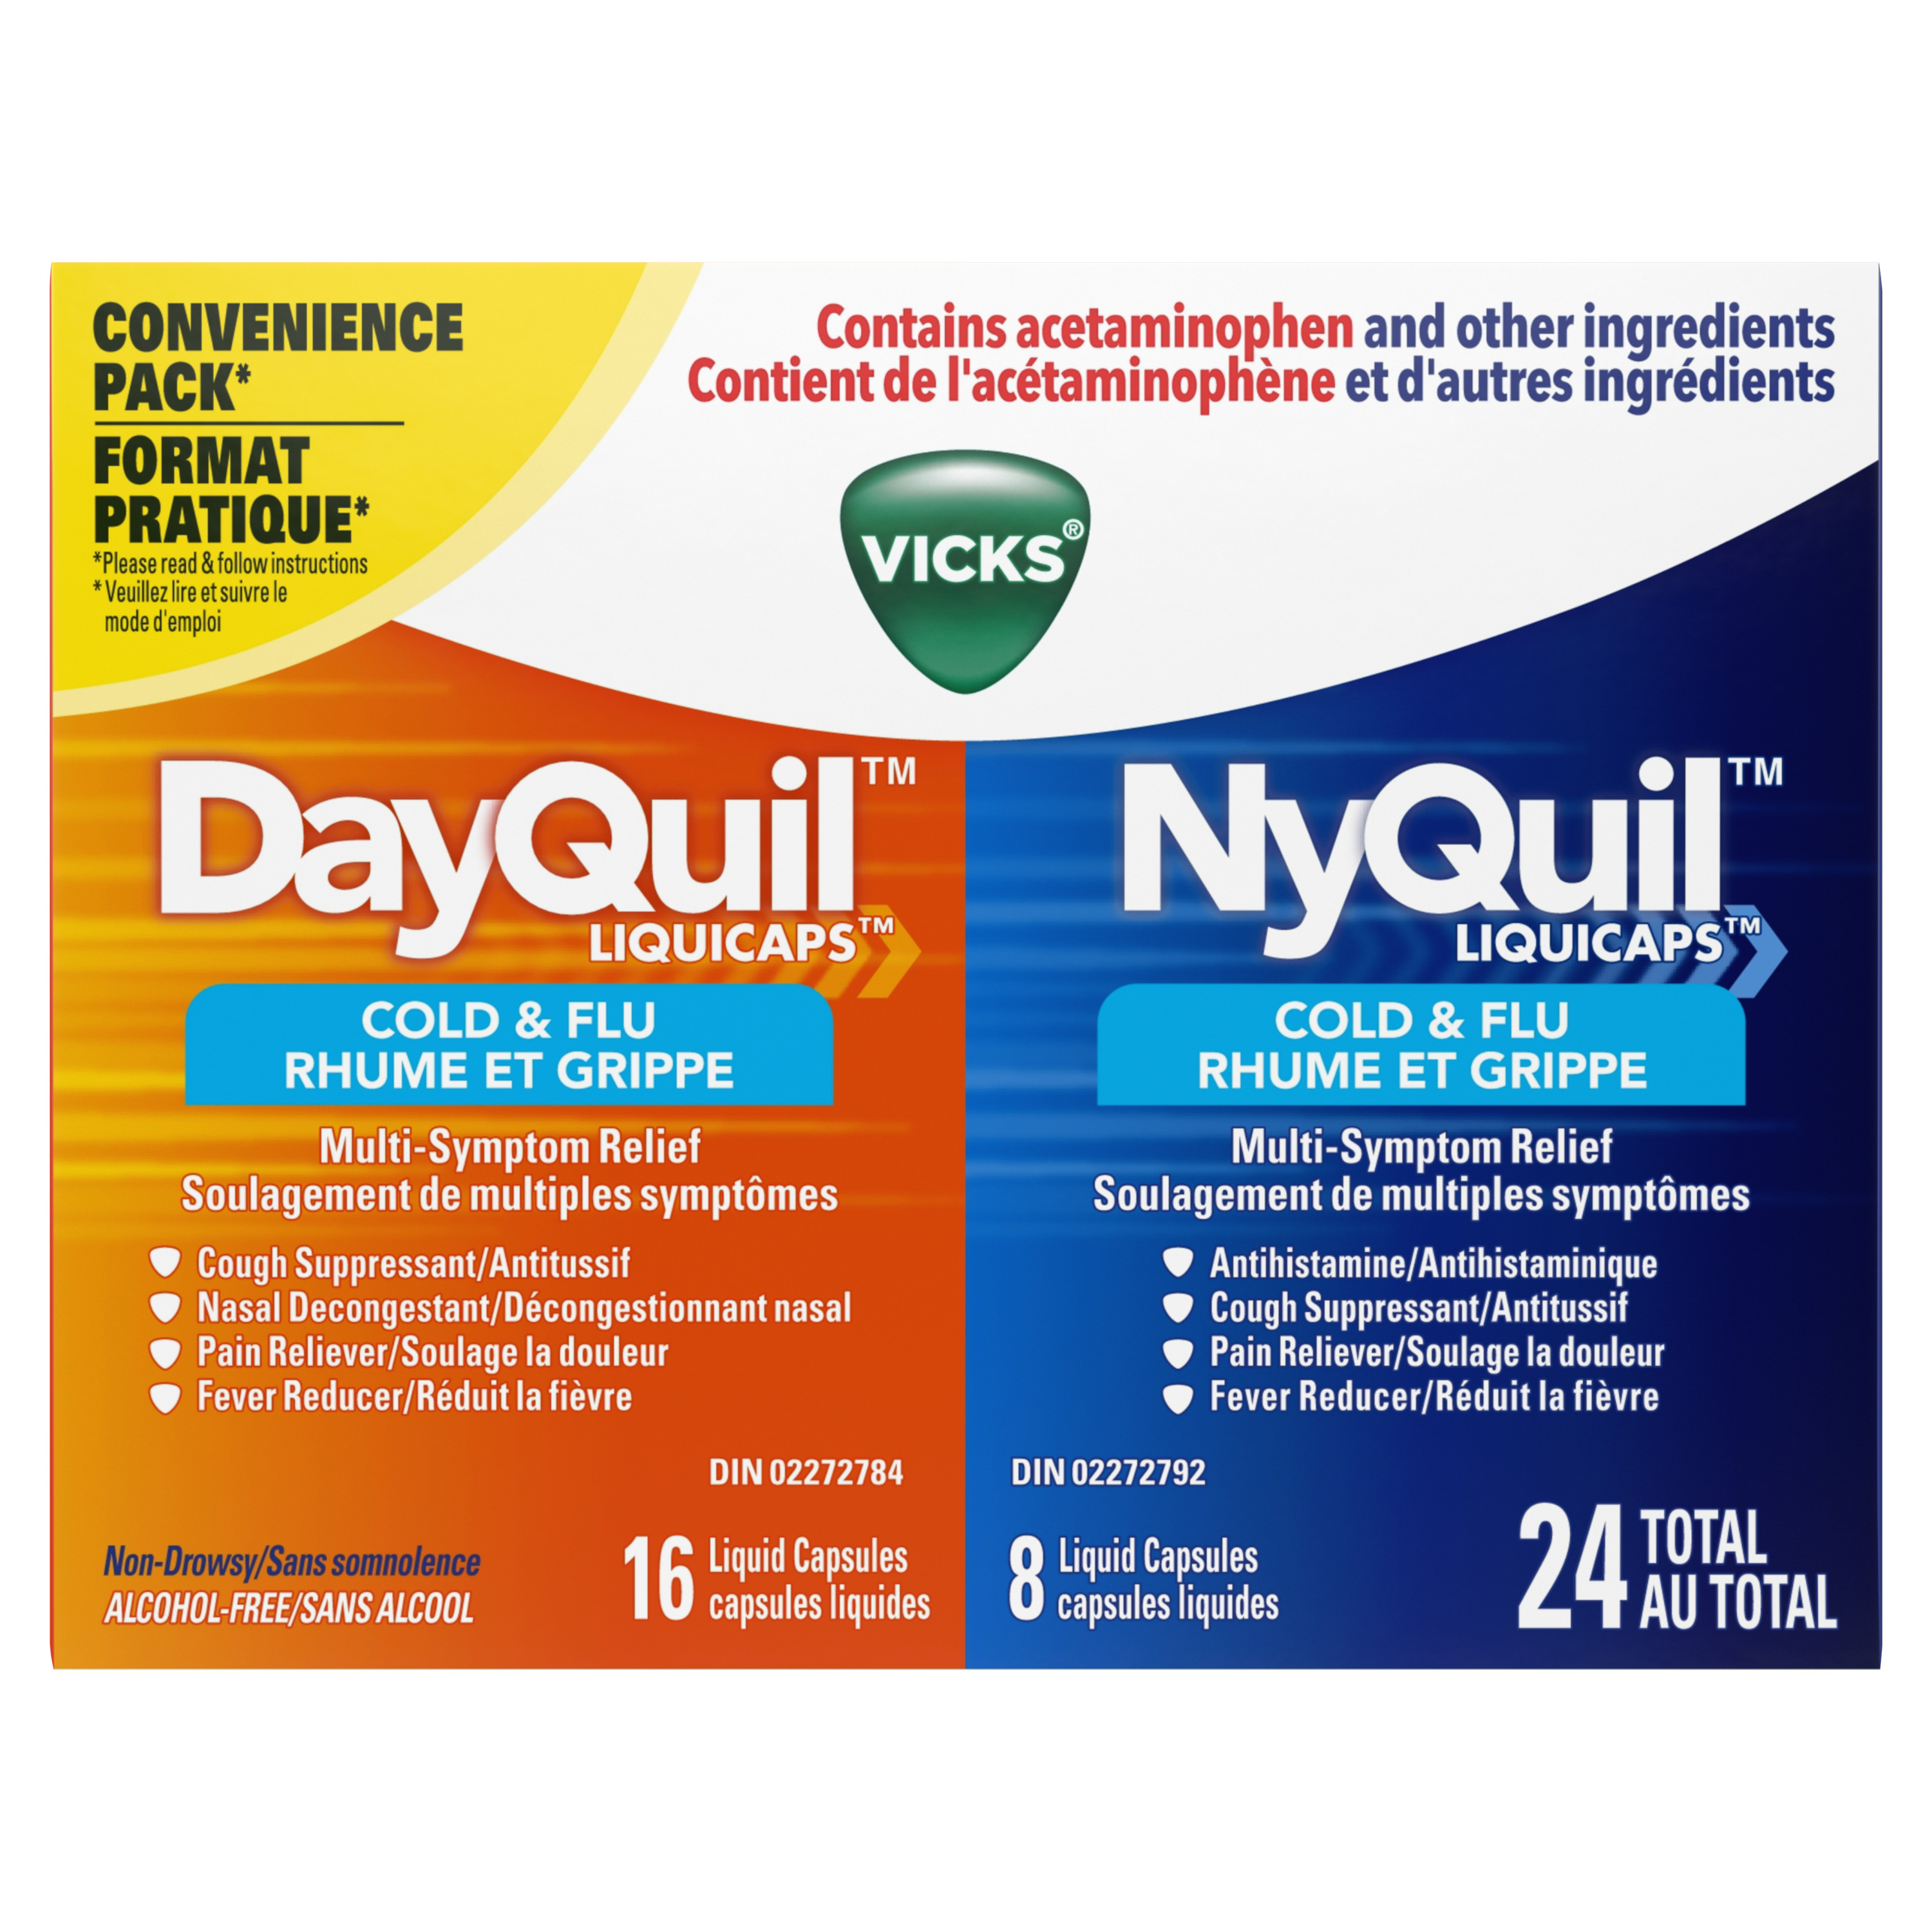 Dexamol cold. Капсулы Vicks. Dayquil. Таблетки Dayquil Nyquil. Wincold таблетки. Лекарство от простуды Cold& Америка.